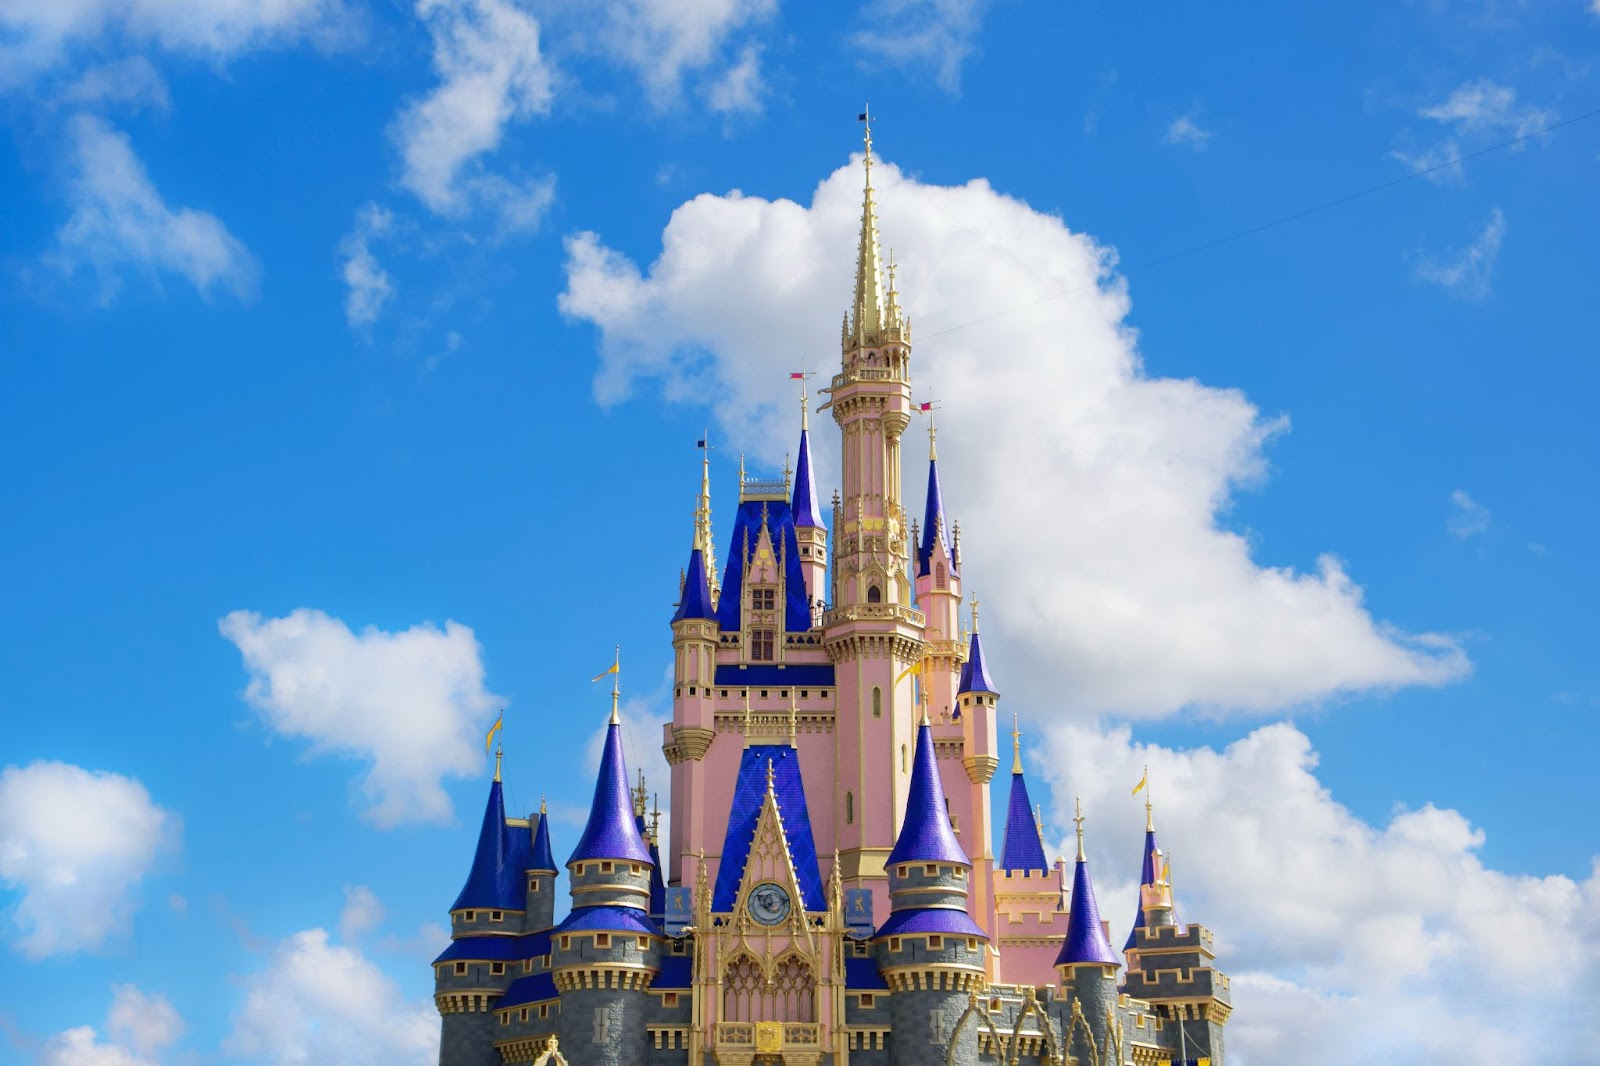 A snapshot of the pink, blue, and gold castle in Walt Disney World against a blue sky and white clouds.